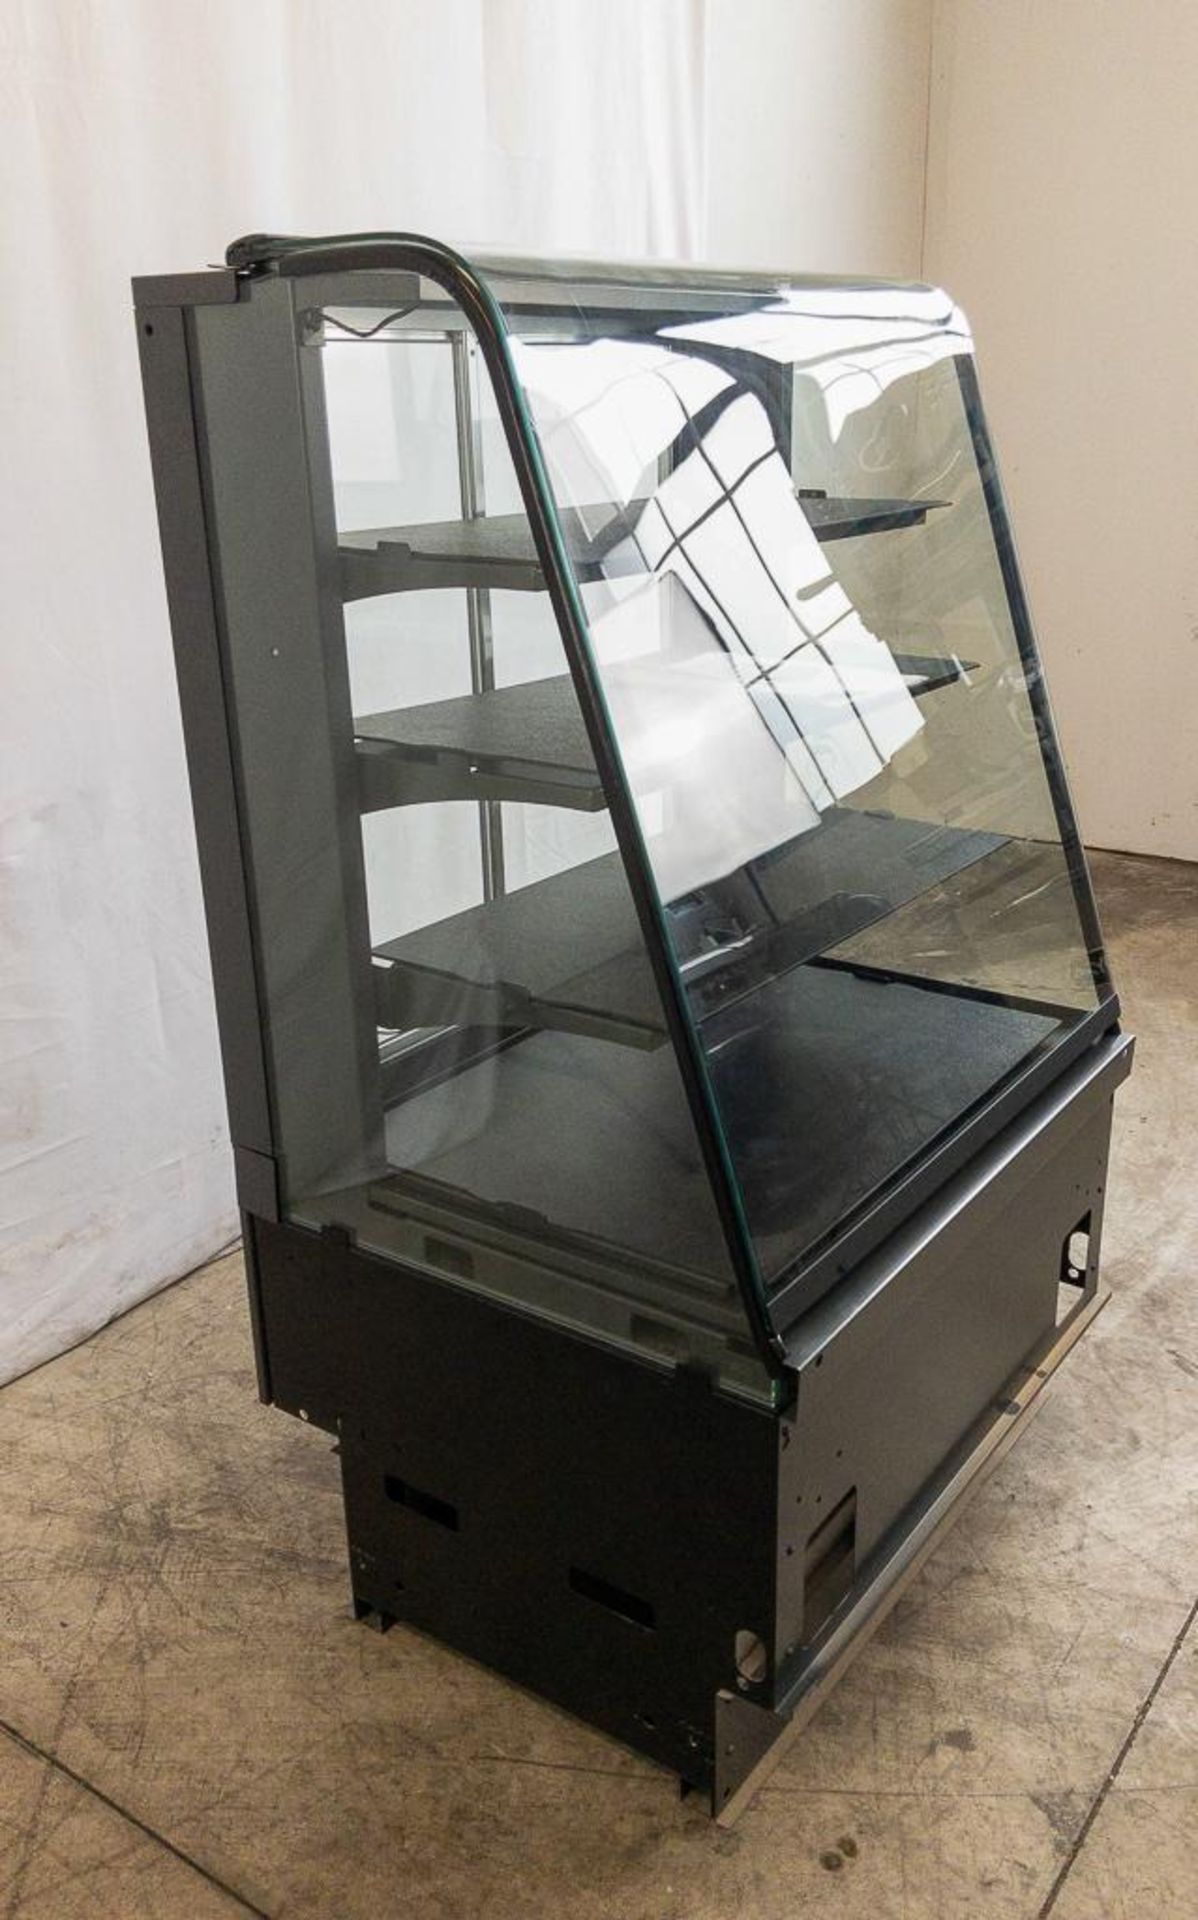 NEW STRUCTURAL CONCEPTS 44'' AMBIENT / DRY MERCHANDISER WITH CURVED GLASS FRONT - MODEL SB4455 - Image 4 of 9